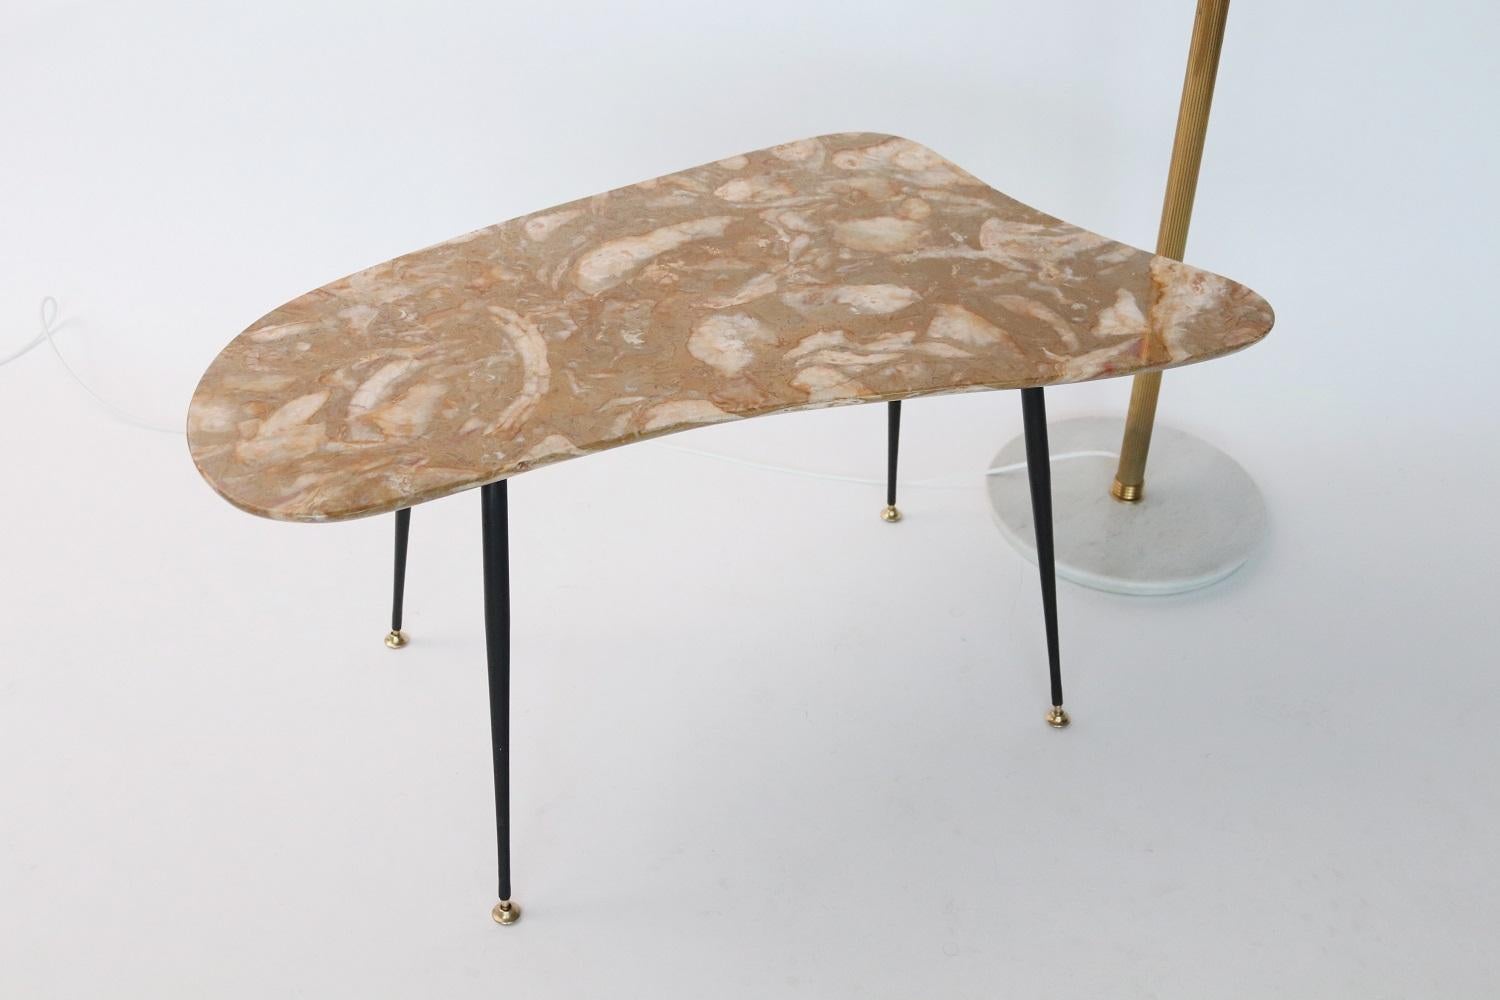 Beautiful coffee table with gorgeous elegant marble top in yellow moutarde color, organic shape and metallic legs with brass tips.
The edges are soft rounded, typically done in the midcentury.
Made in Italy during the 1950s.
The marble is